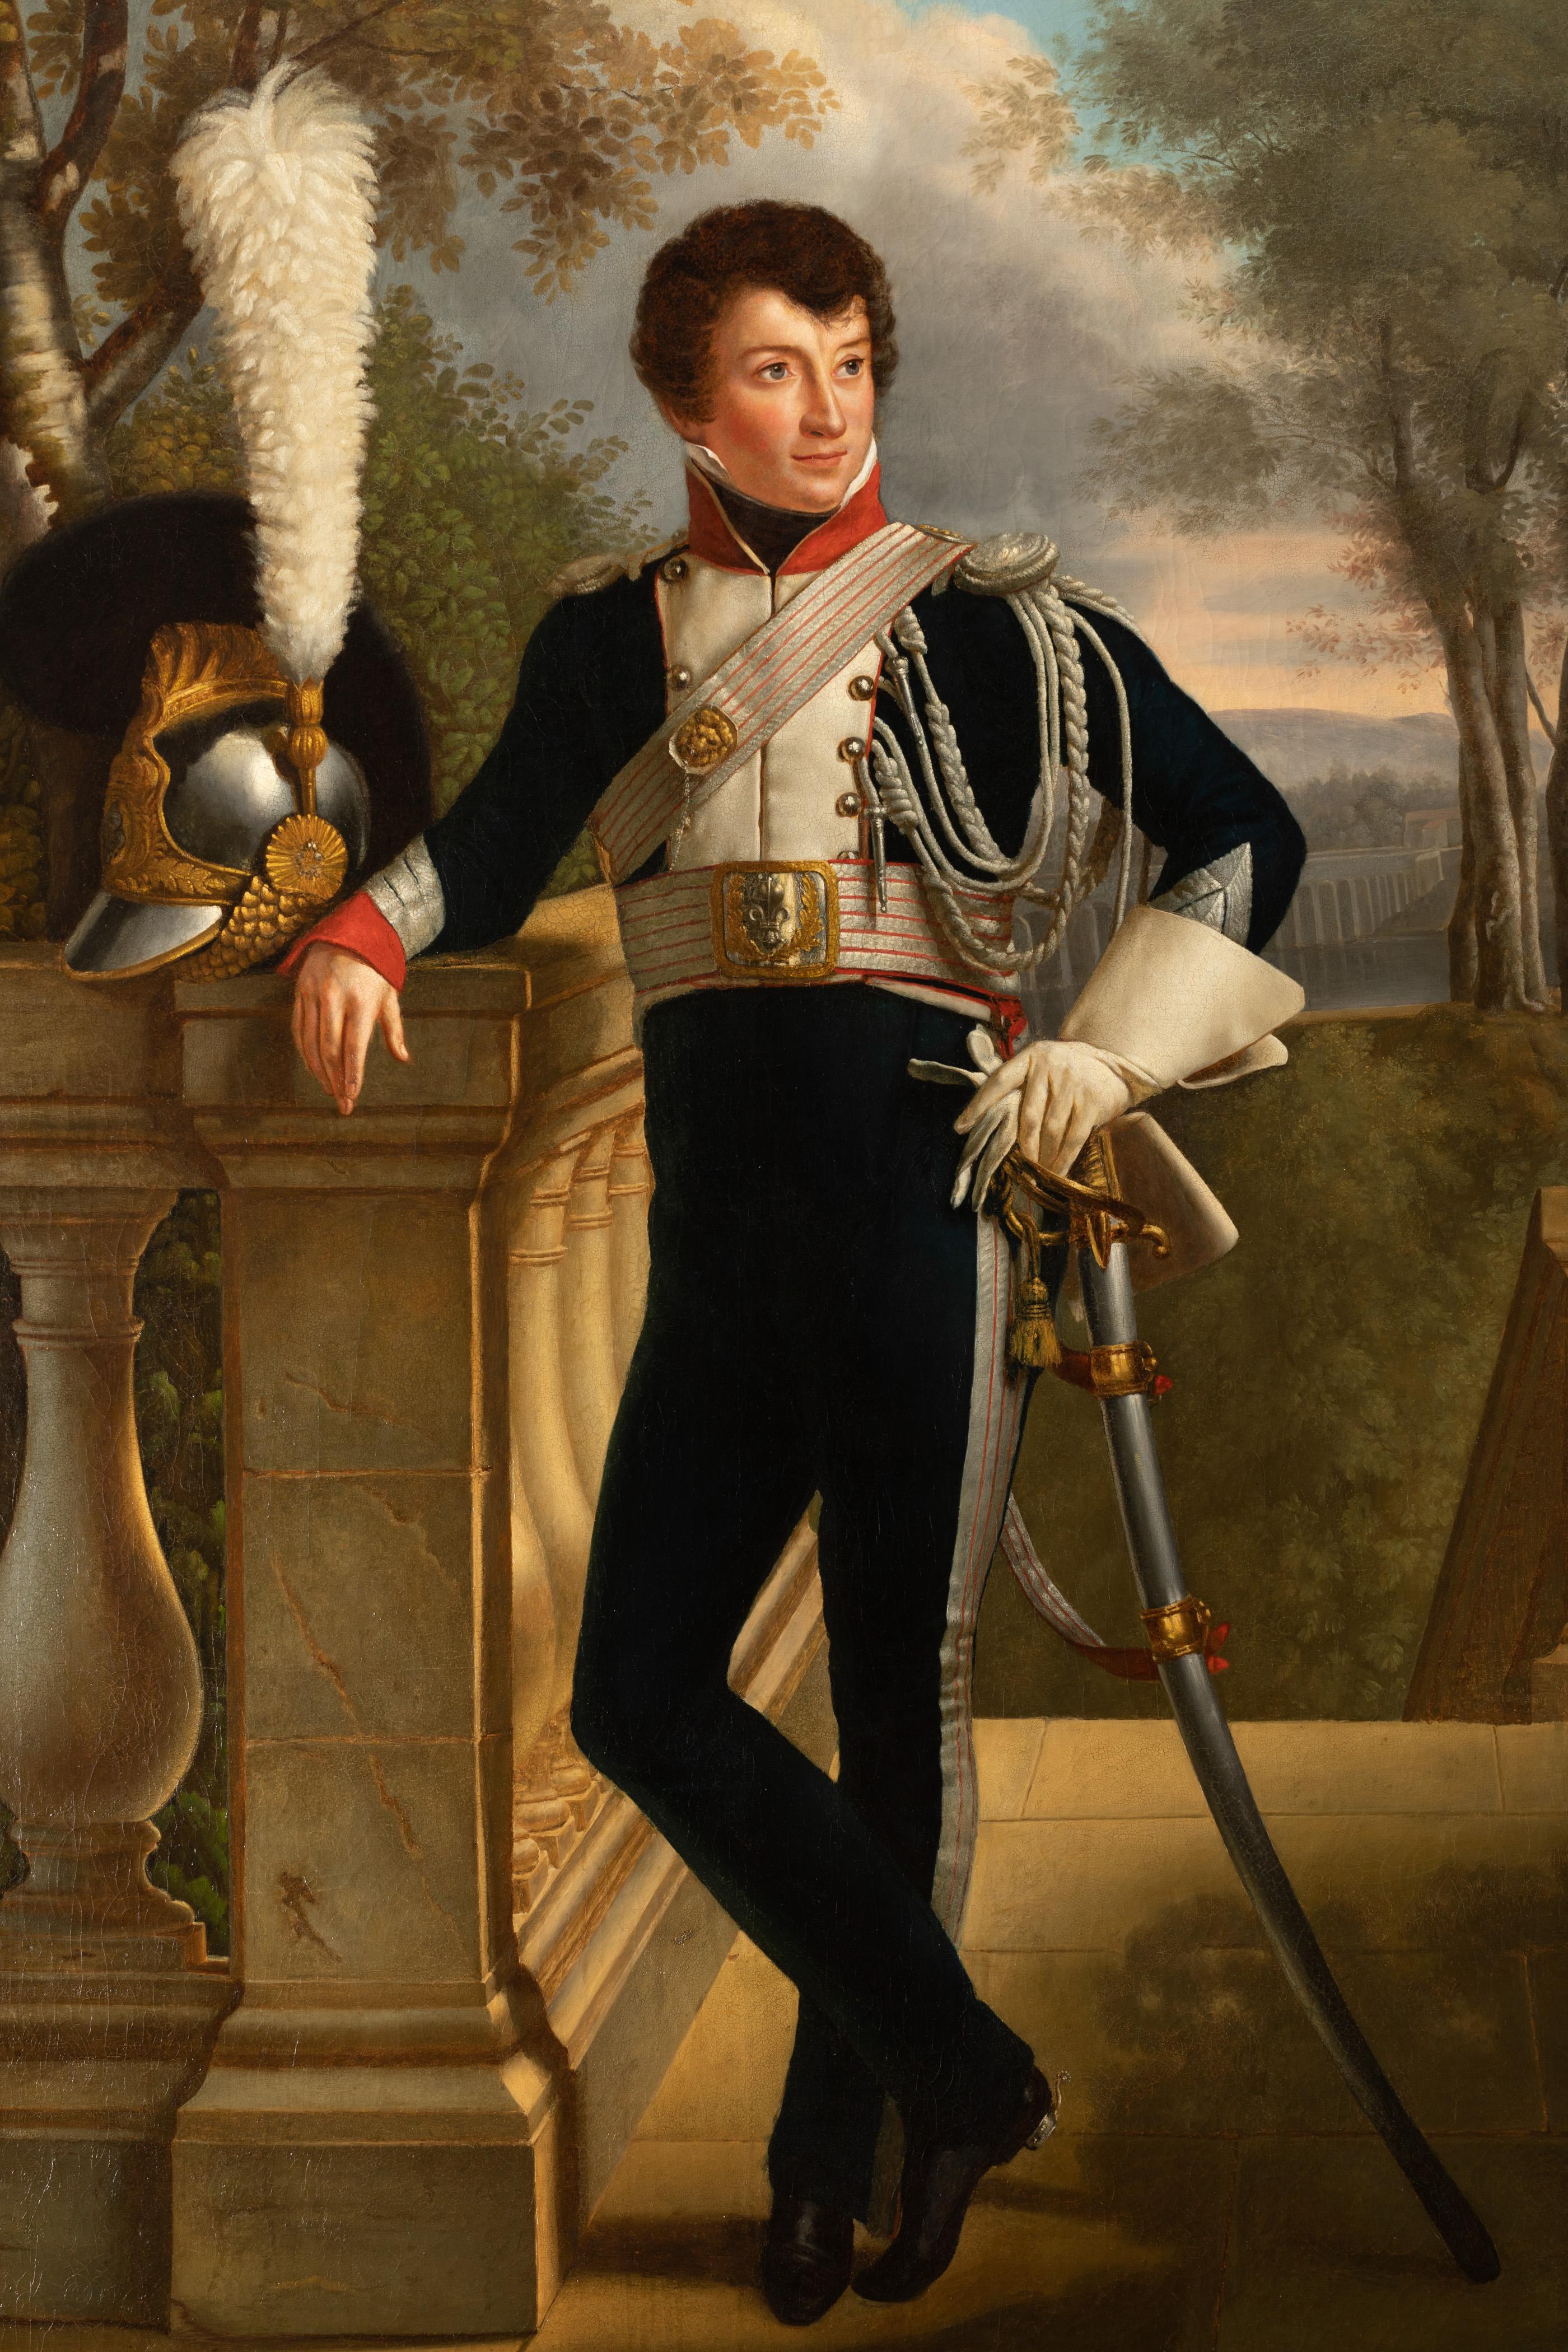 Portrait Of General Anne-Charles Lebrun (1775-1859).
Oil on canvas Attributed to Joseph Kinson (1770-1839).

Dimensions without frame: 207cm x 130.5cm.
Dimensions with frame: 226cm x 159cm.

François-Joseph Kinson:

He settled in Paris after